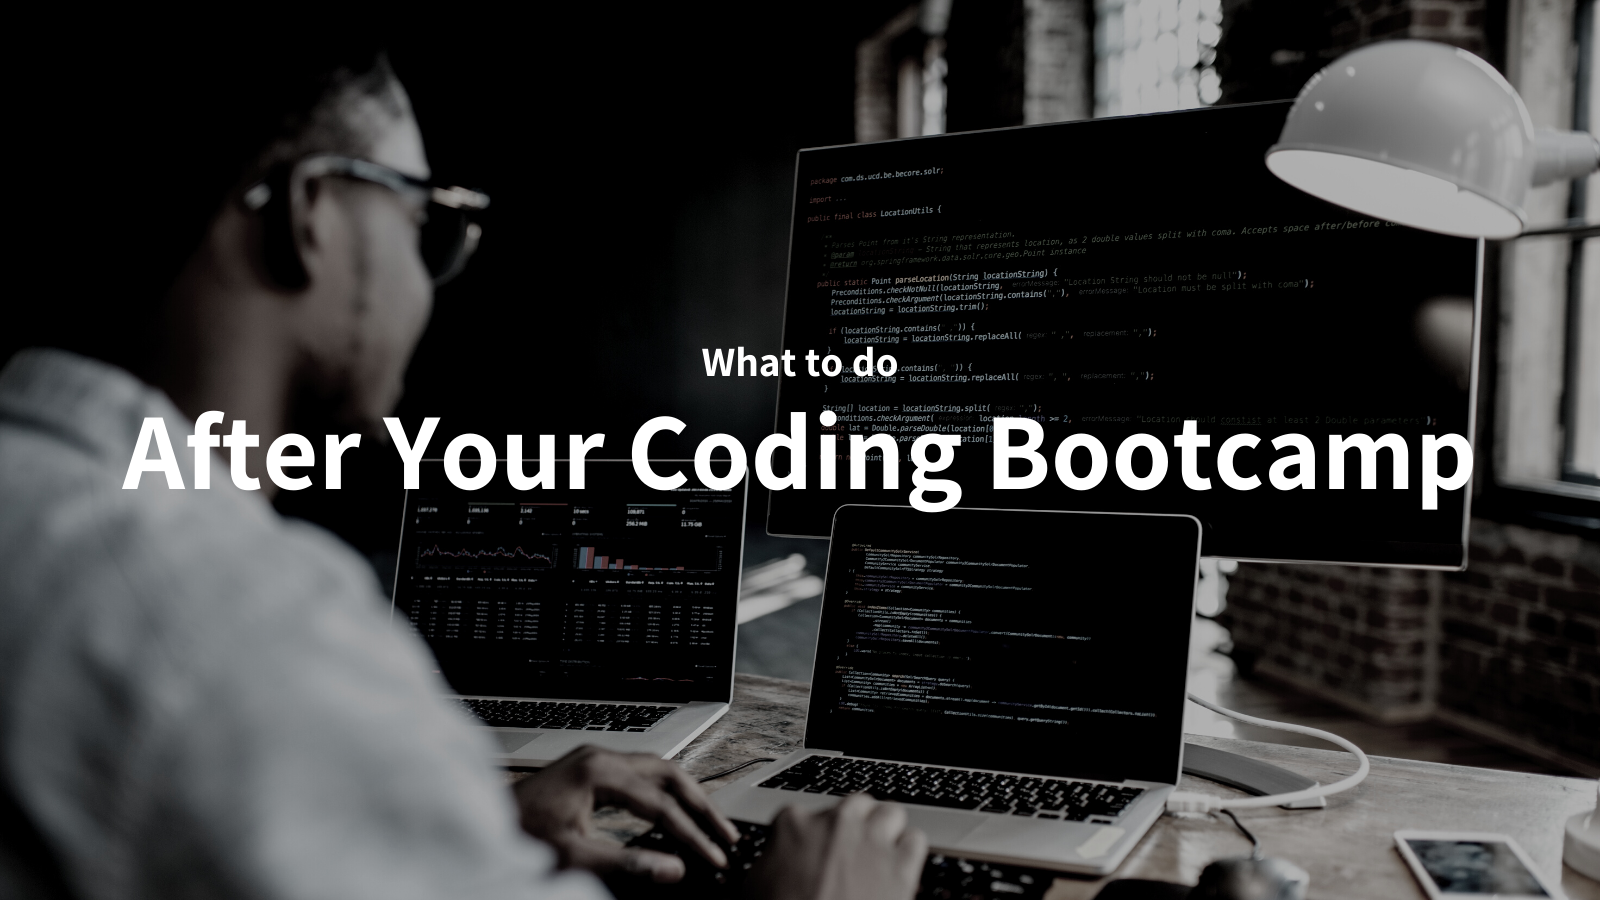 What to do After Your Coding Bootcamp